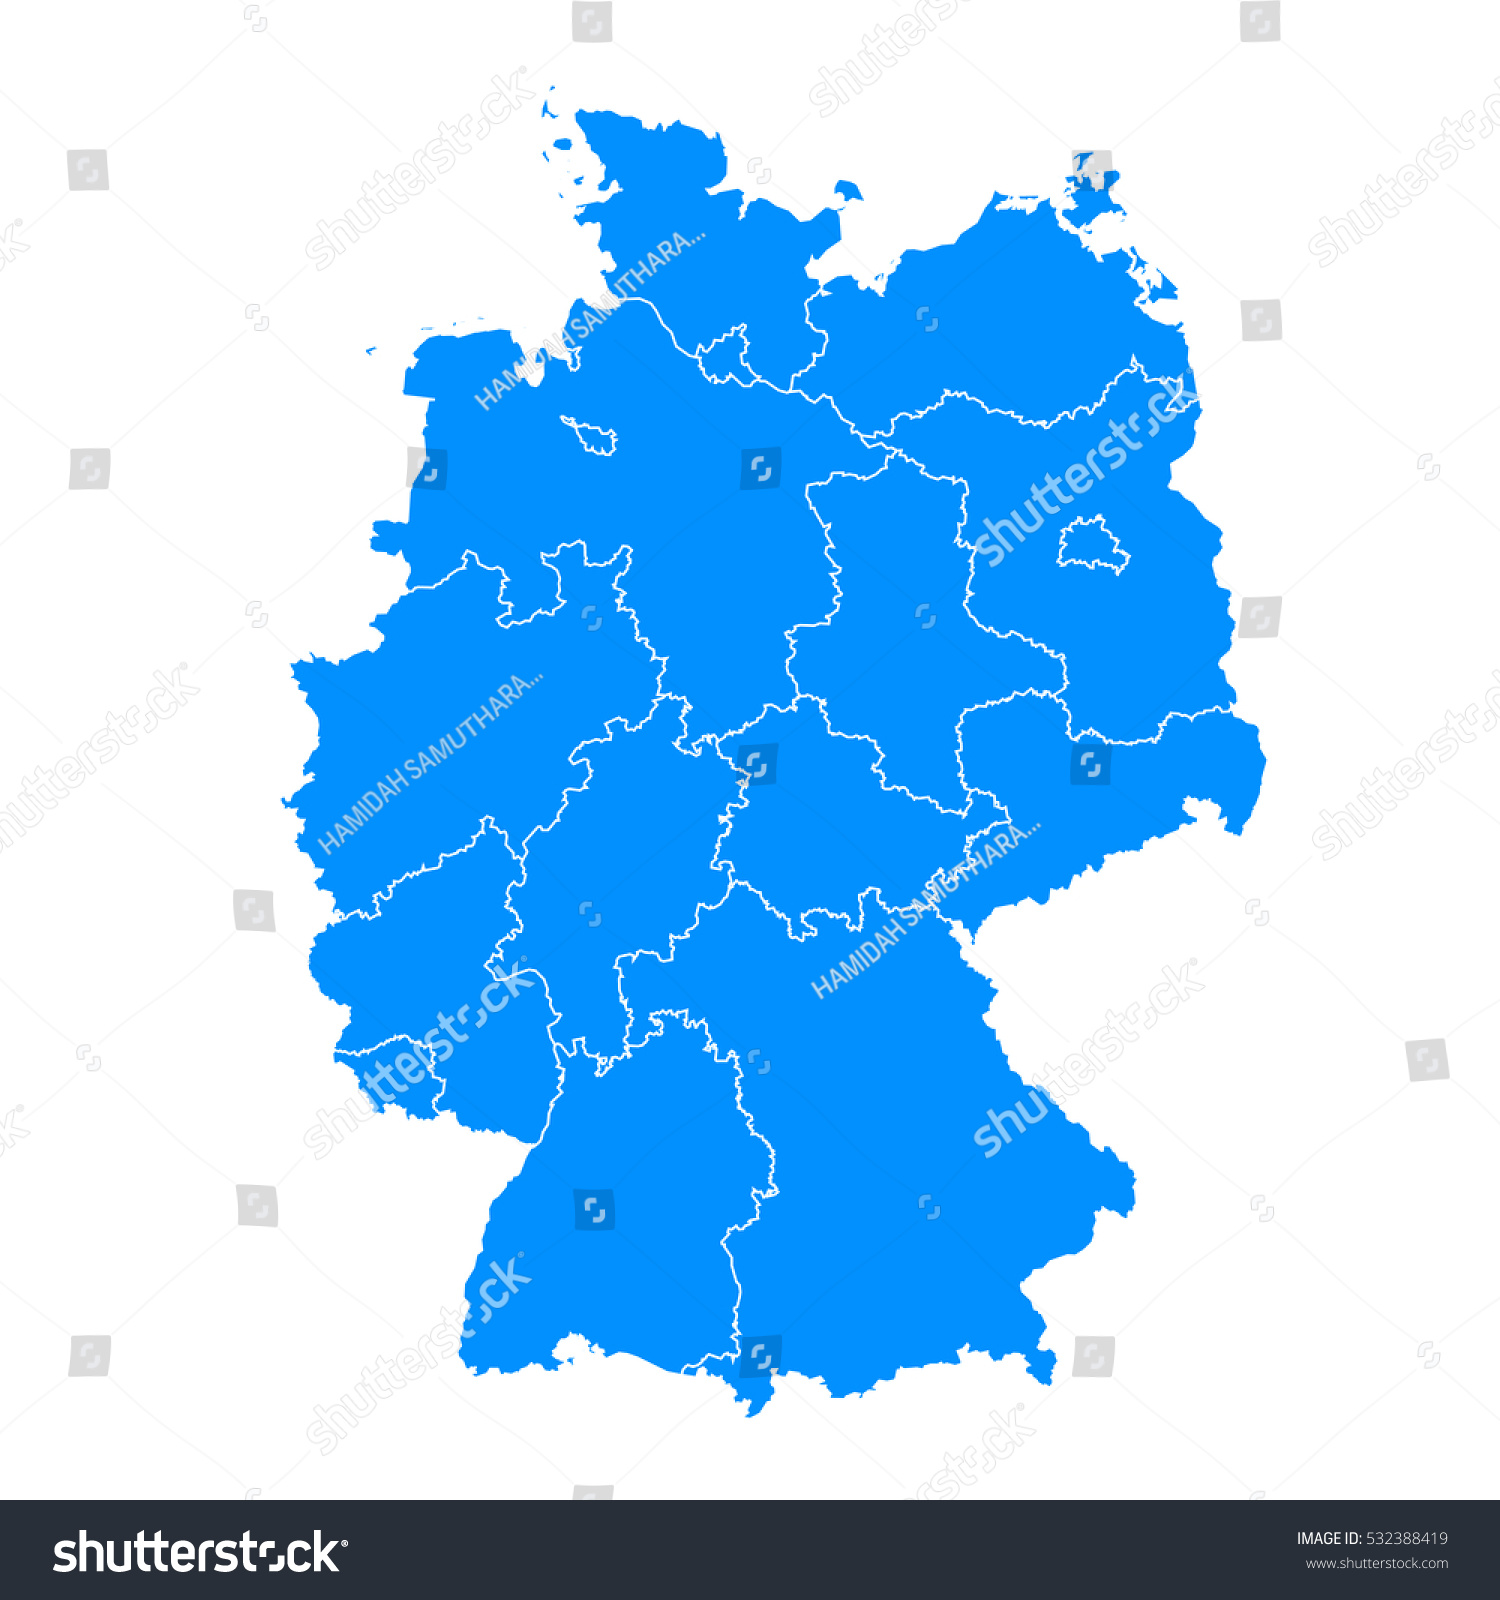 Blue map of Germany #532388419